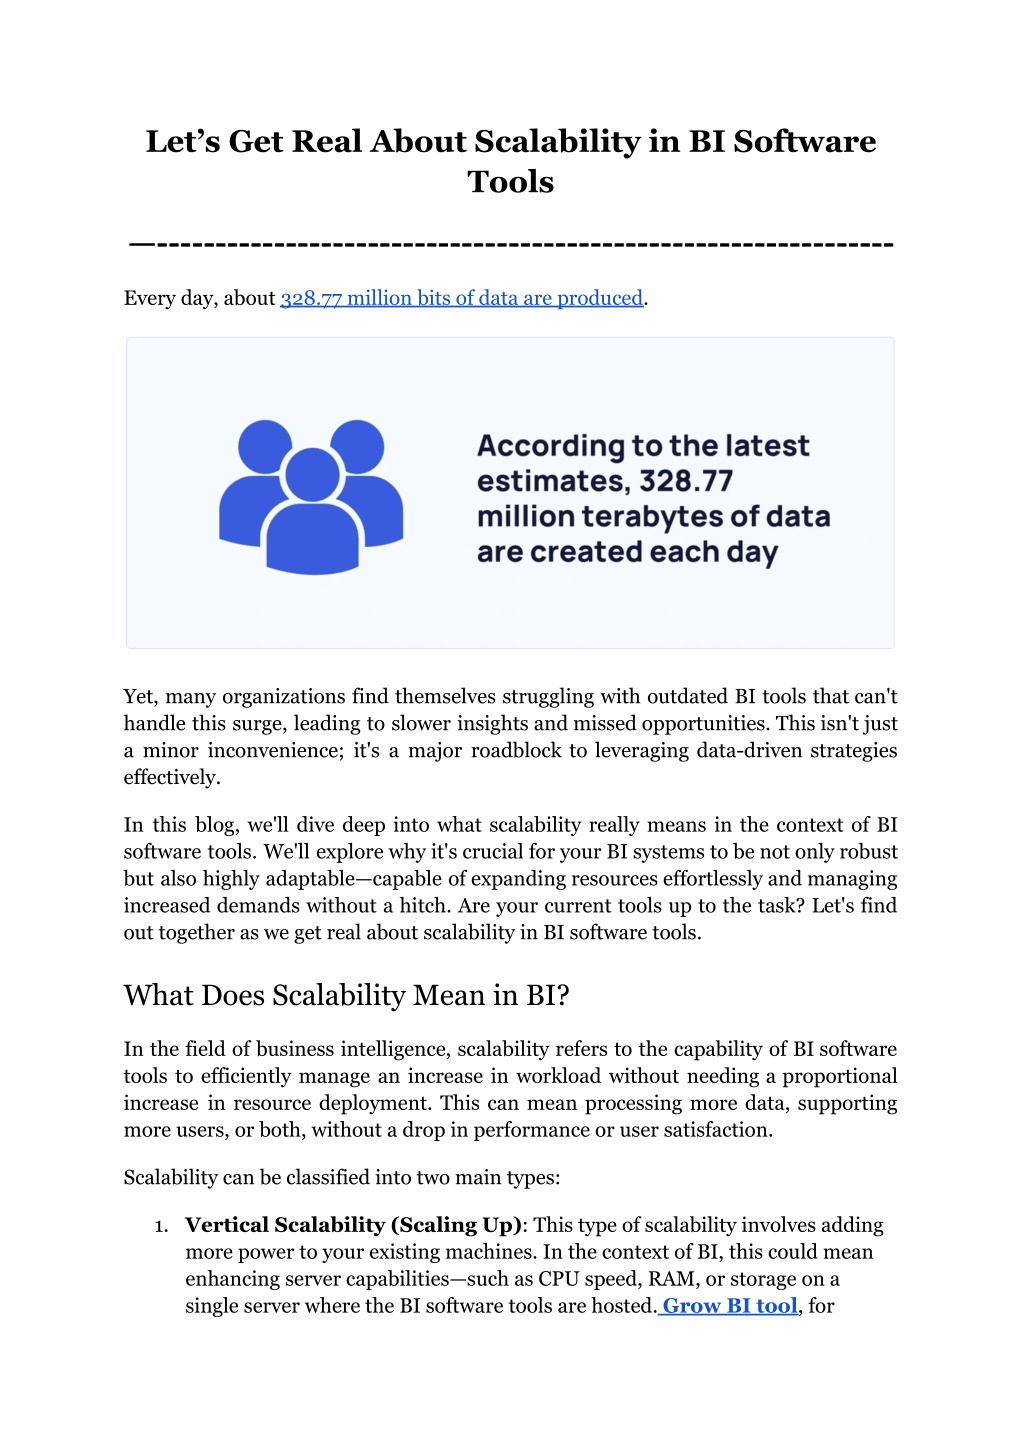 let s get real about scalability in bi software l.w